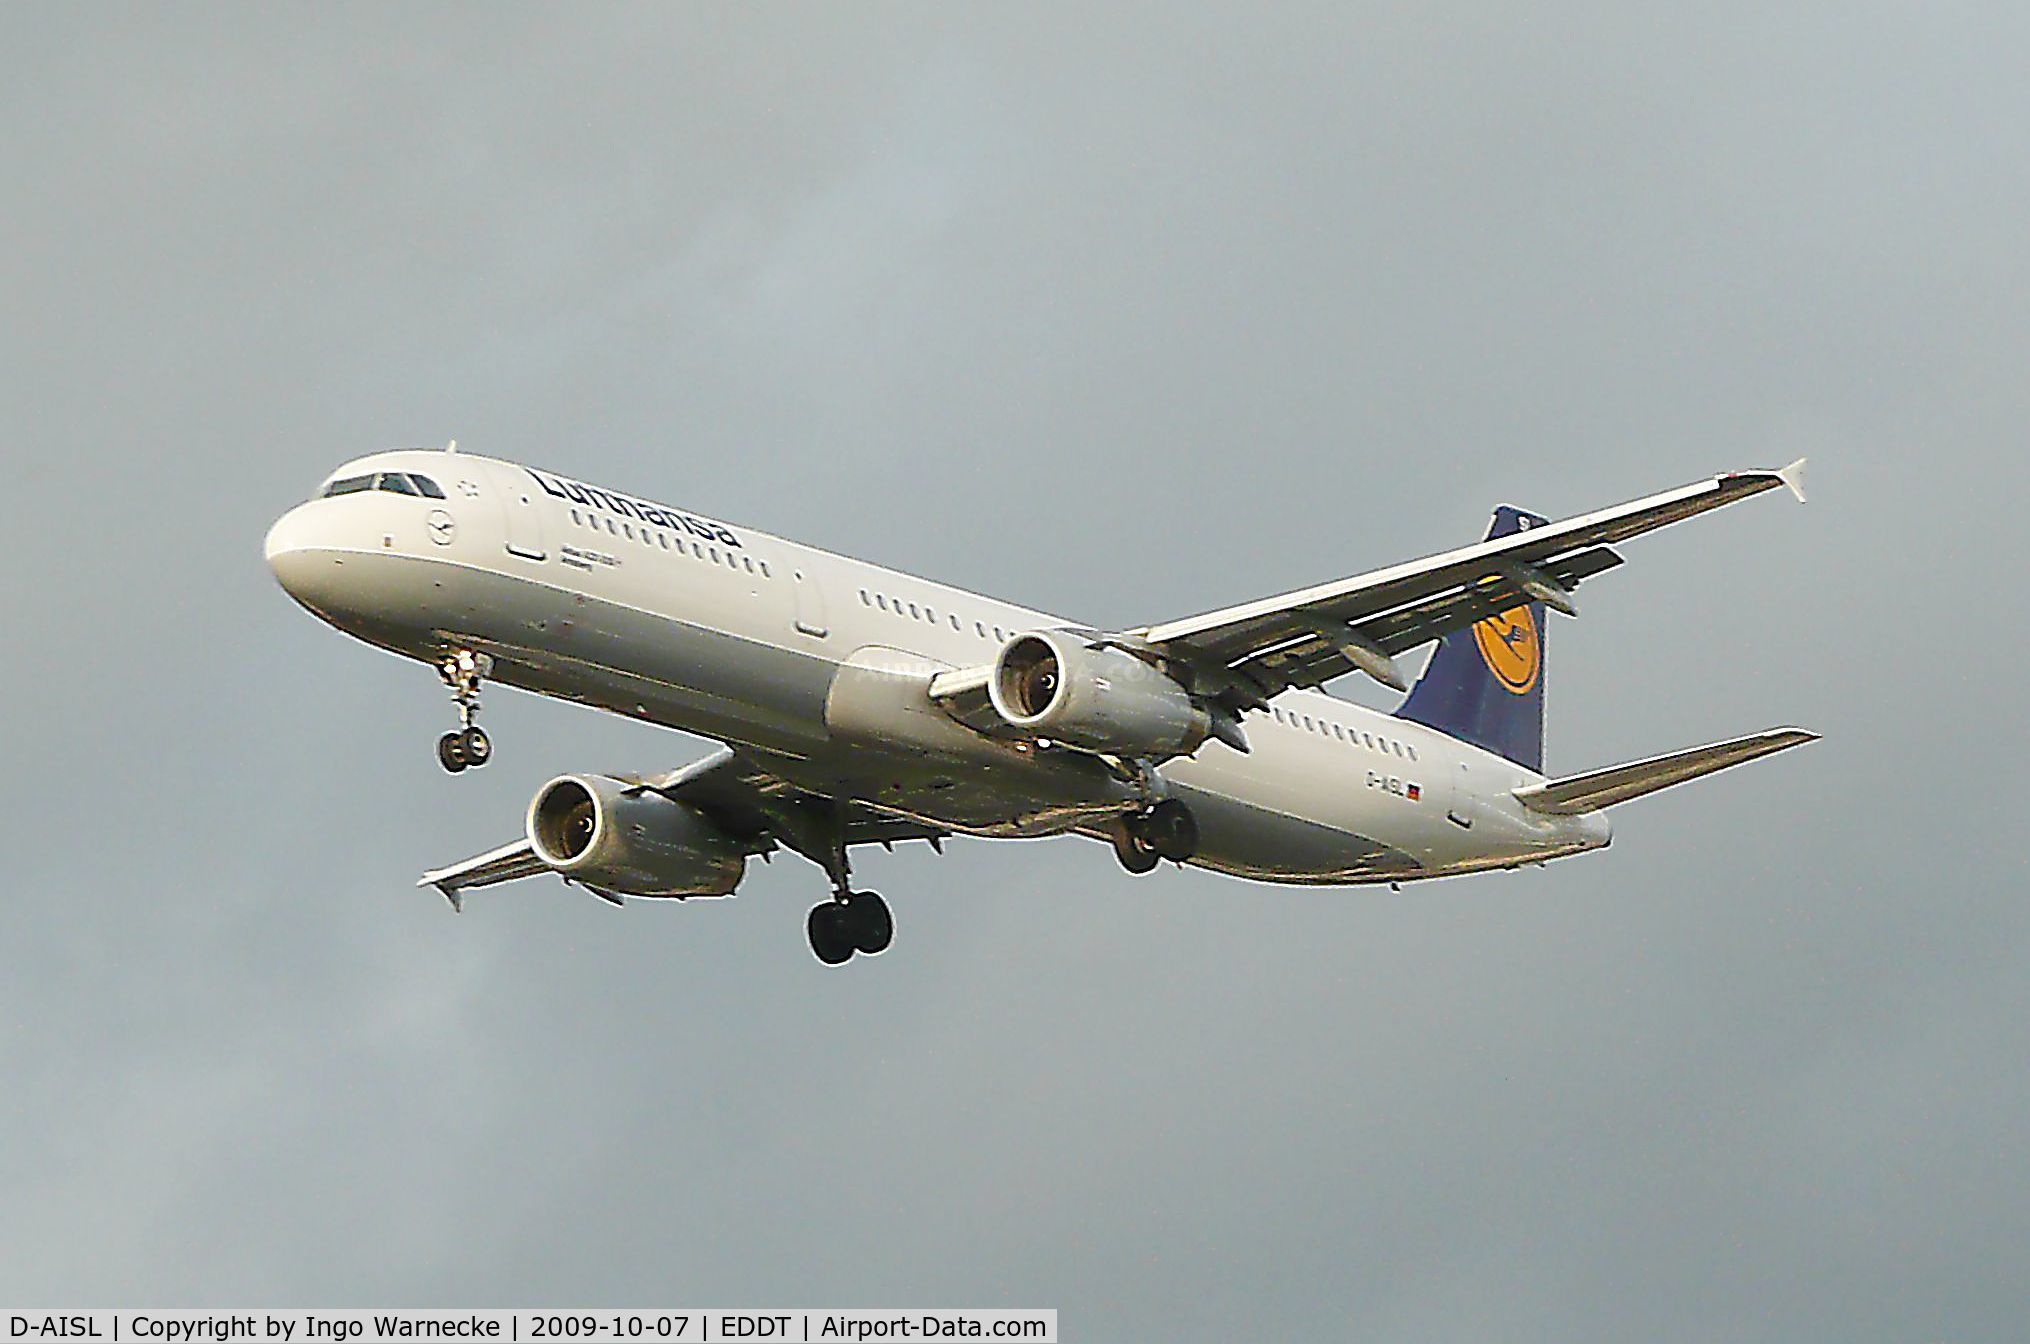 D-AISL, 2008 Airbus A321-231 C/N 3434, Airbus A321-231 of Lufthansa on final approach into Tegel airport